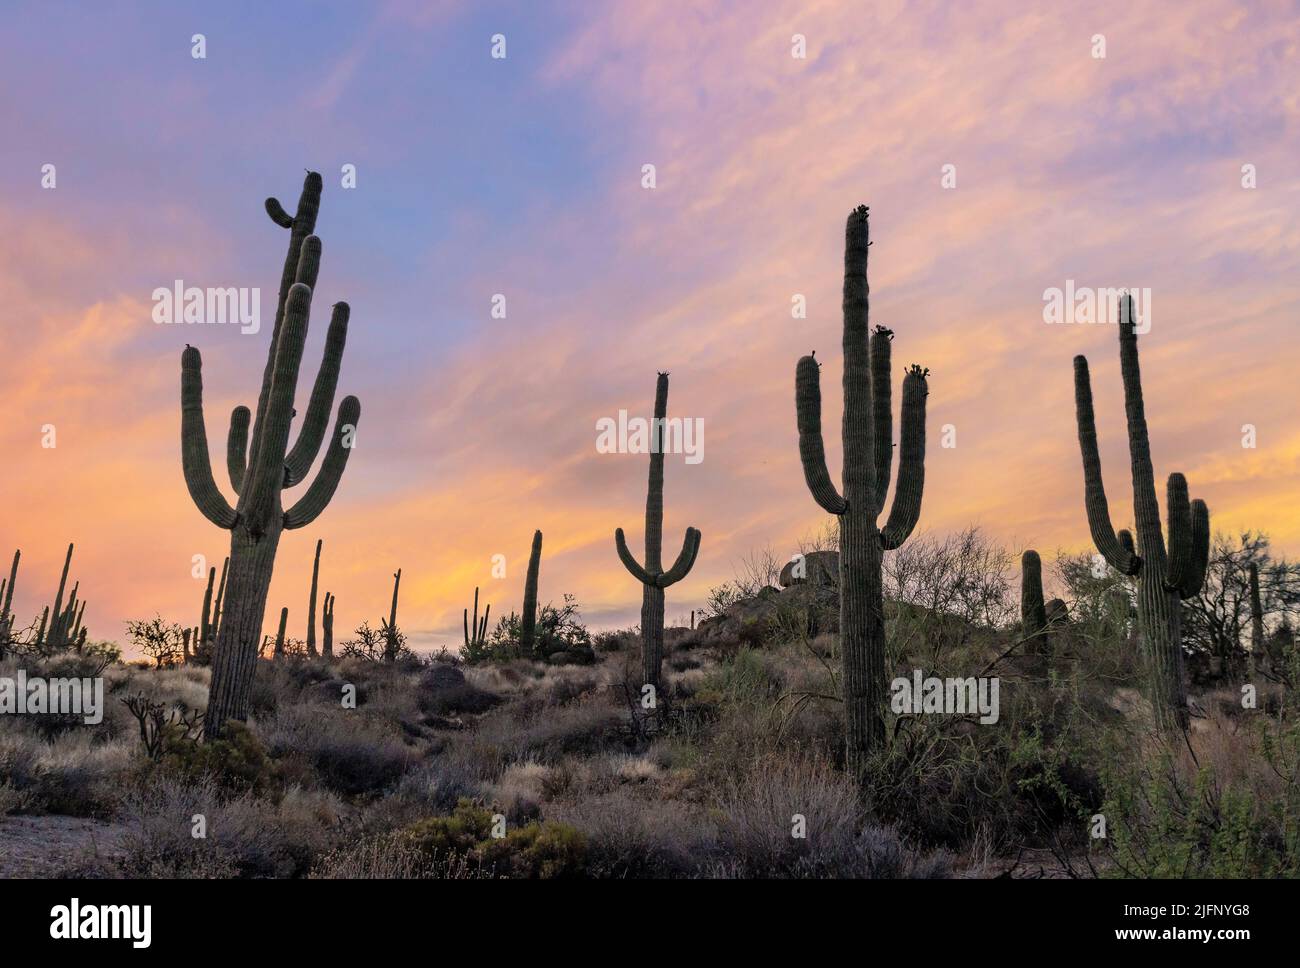 Saguaro Cactus On A Hill At Sunrise Time In AZ Stock Photo